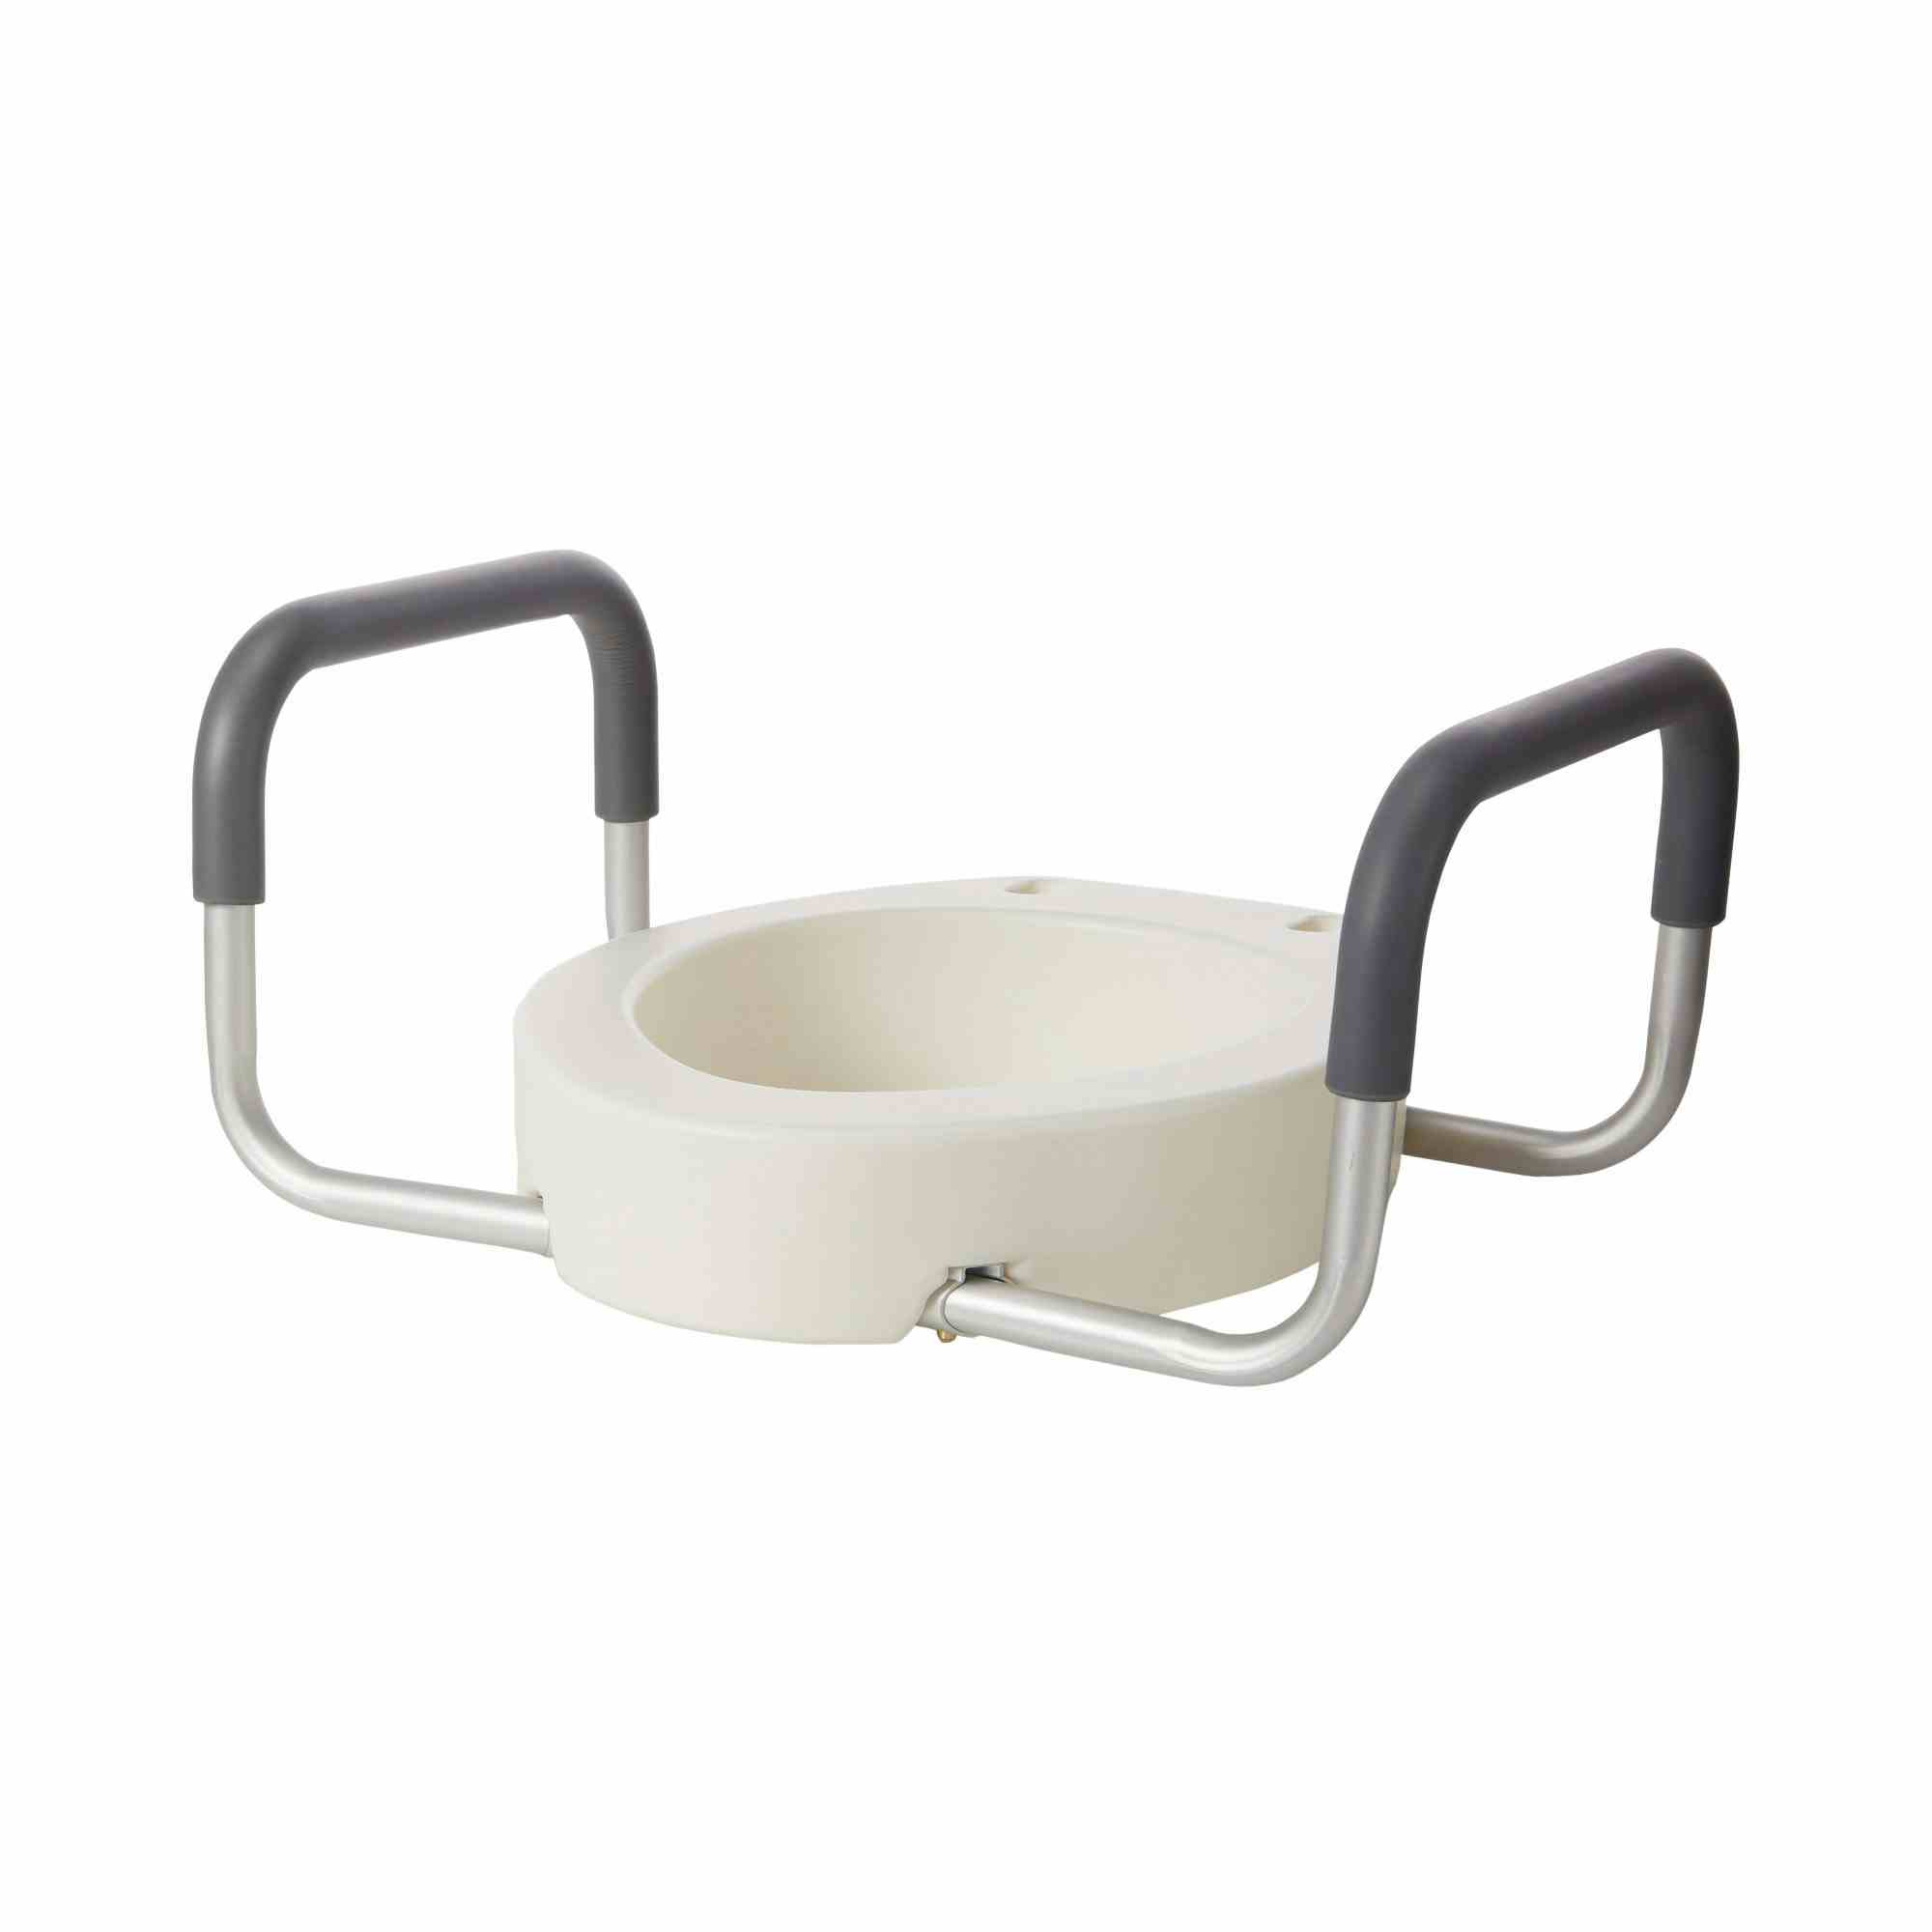 drive Premium Elongated Raised Toilet Seat with Arms, 12403, 1 Each